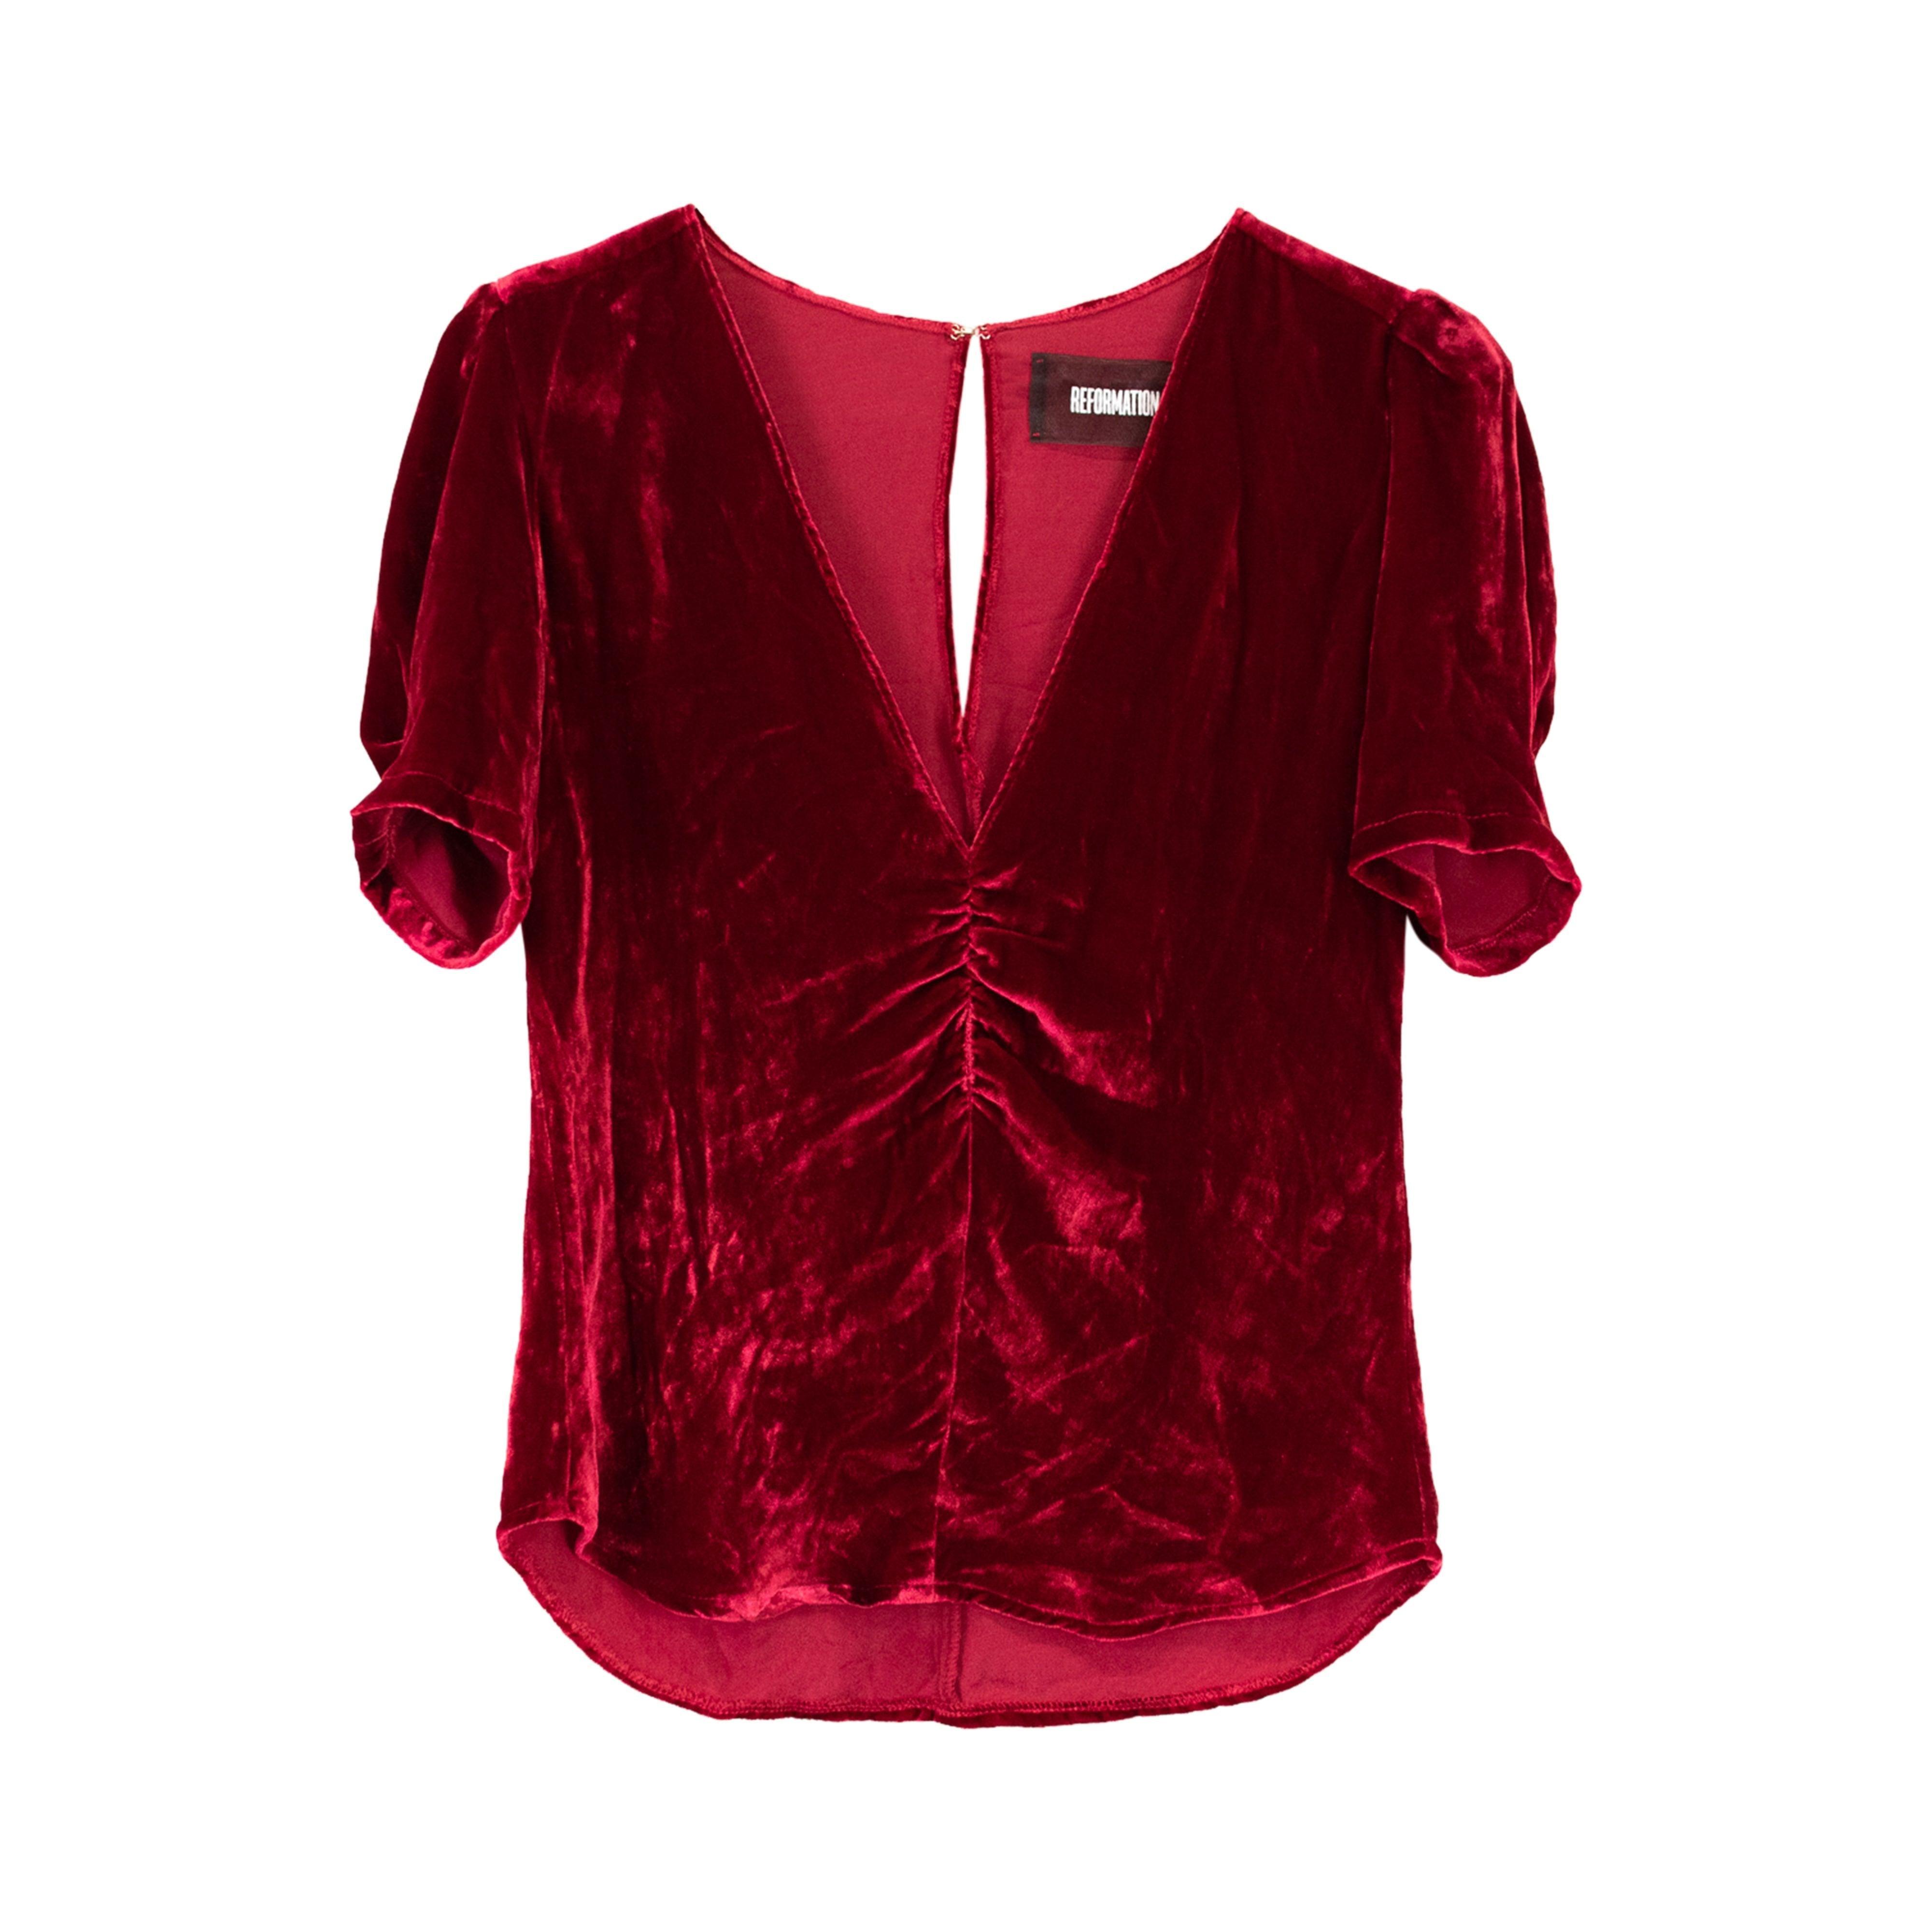 Reformation Top - Women's XS - Fashionably Yours